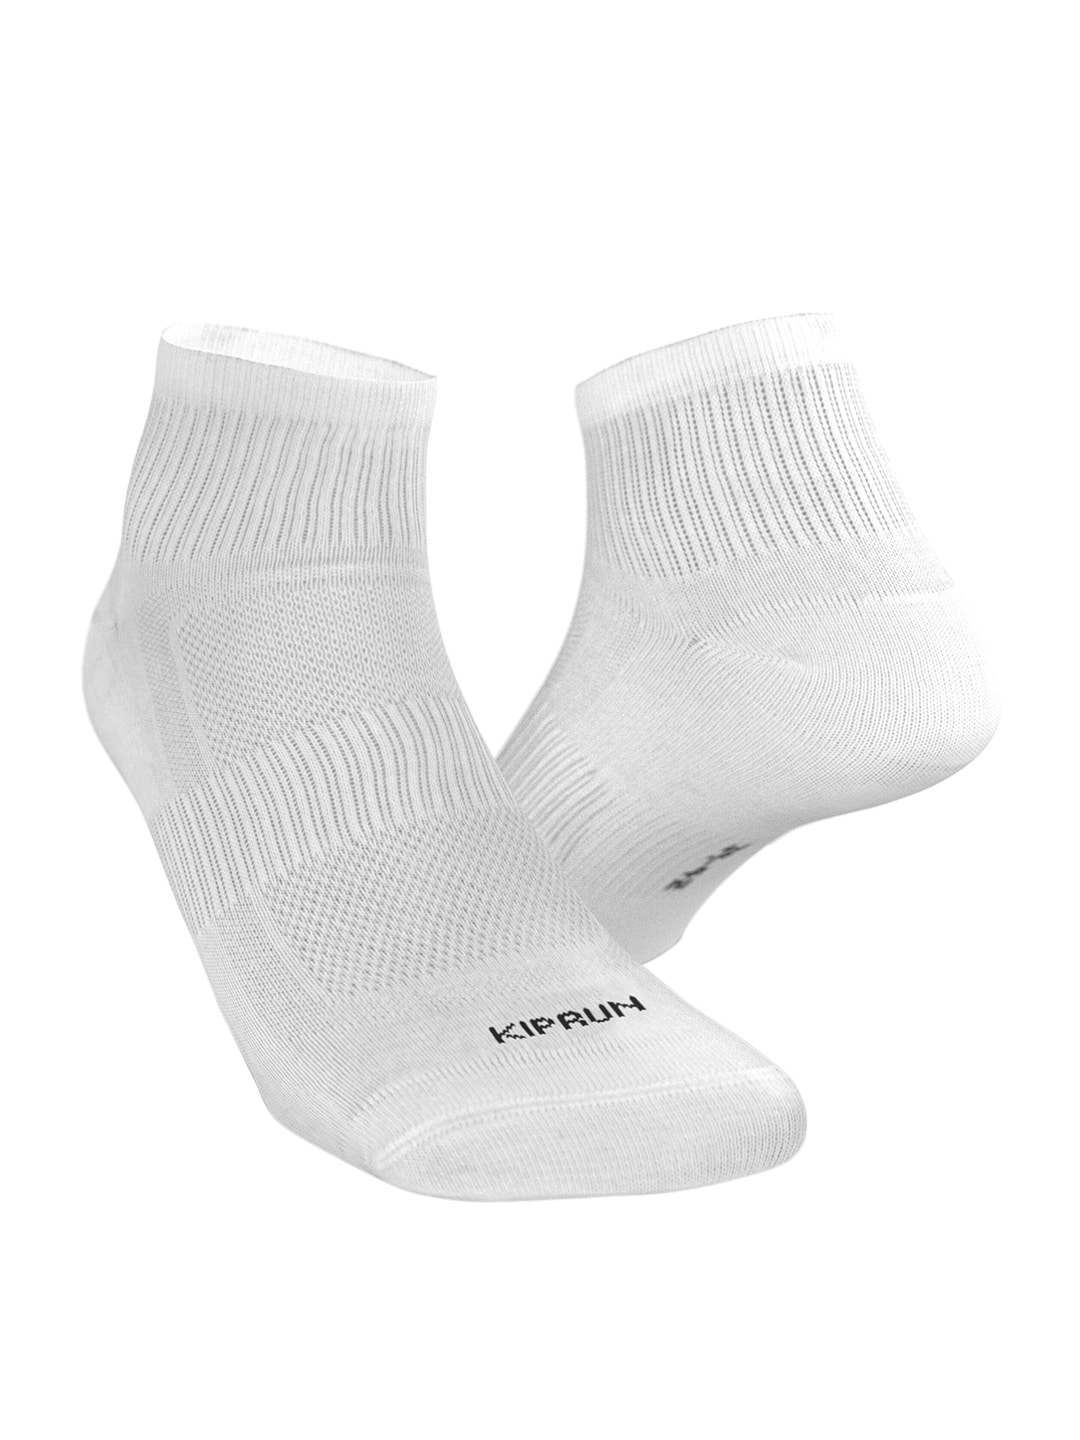 KIPRUN By Decathlon Pack of 3 Solid White Running Socks Price in India